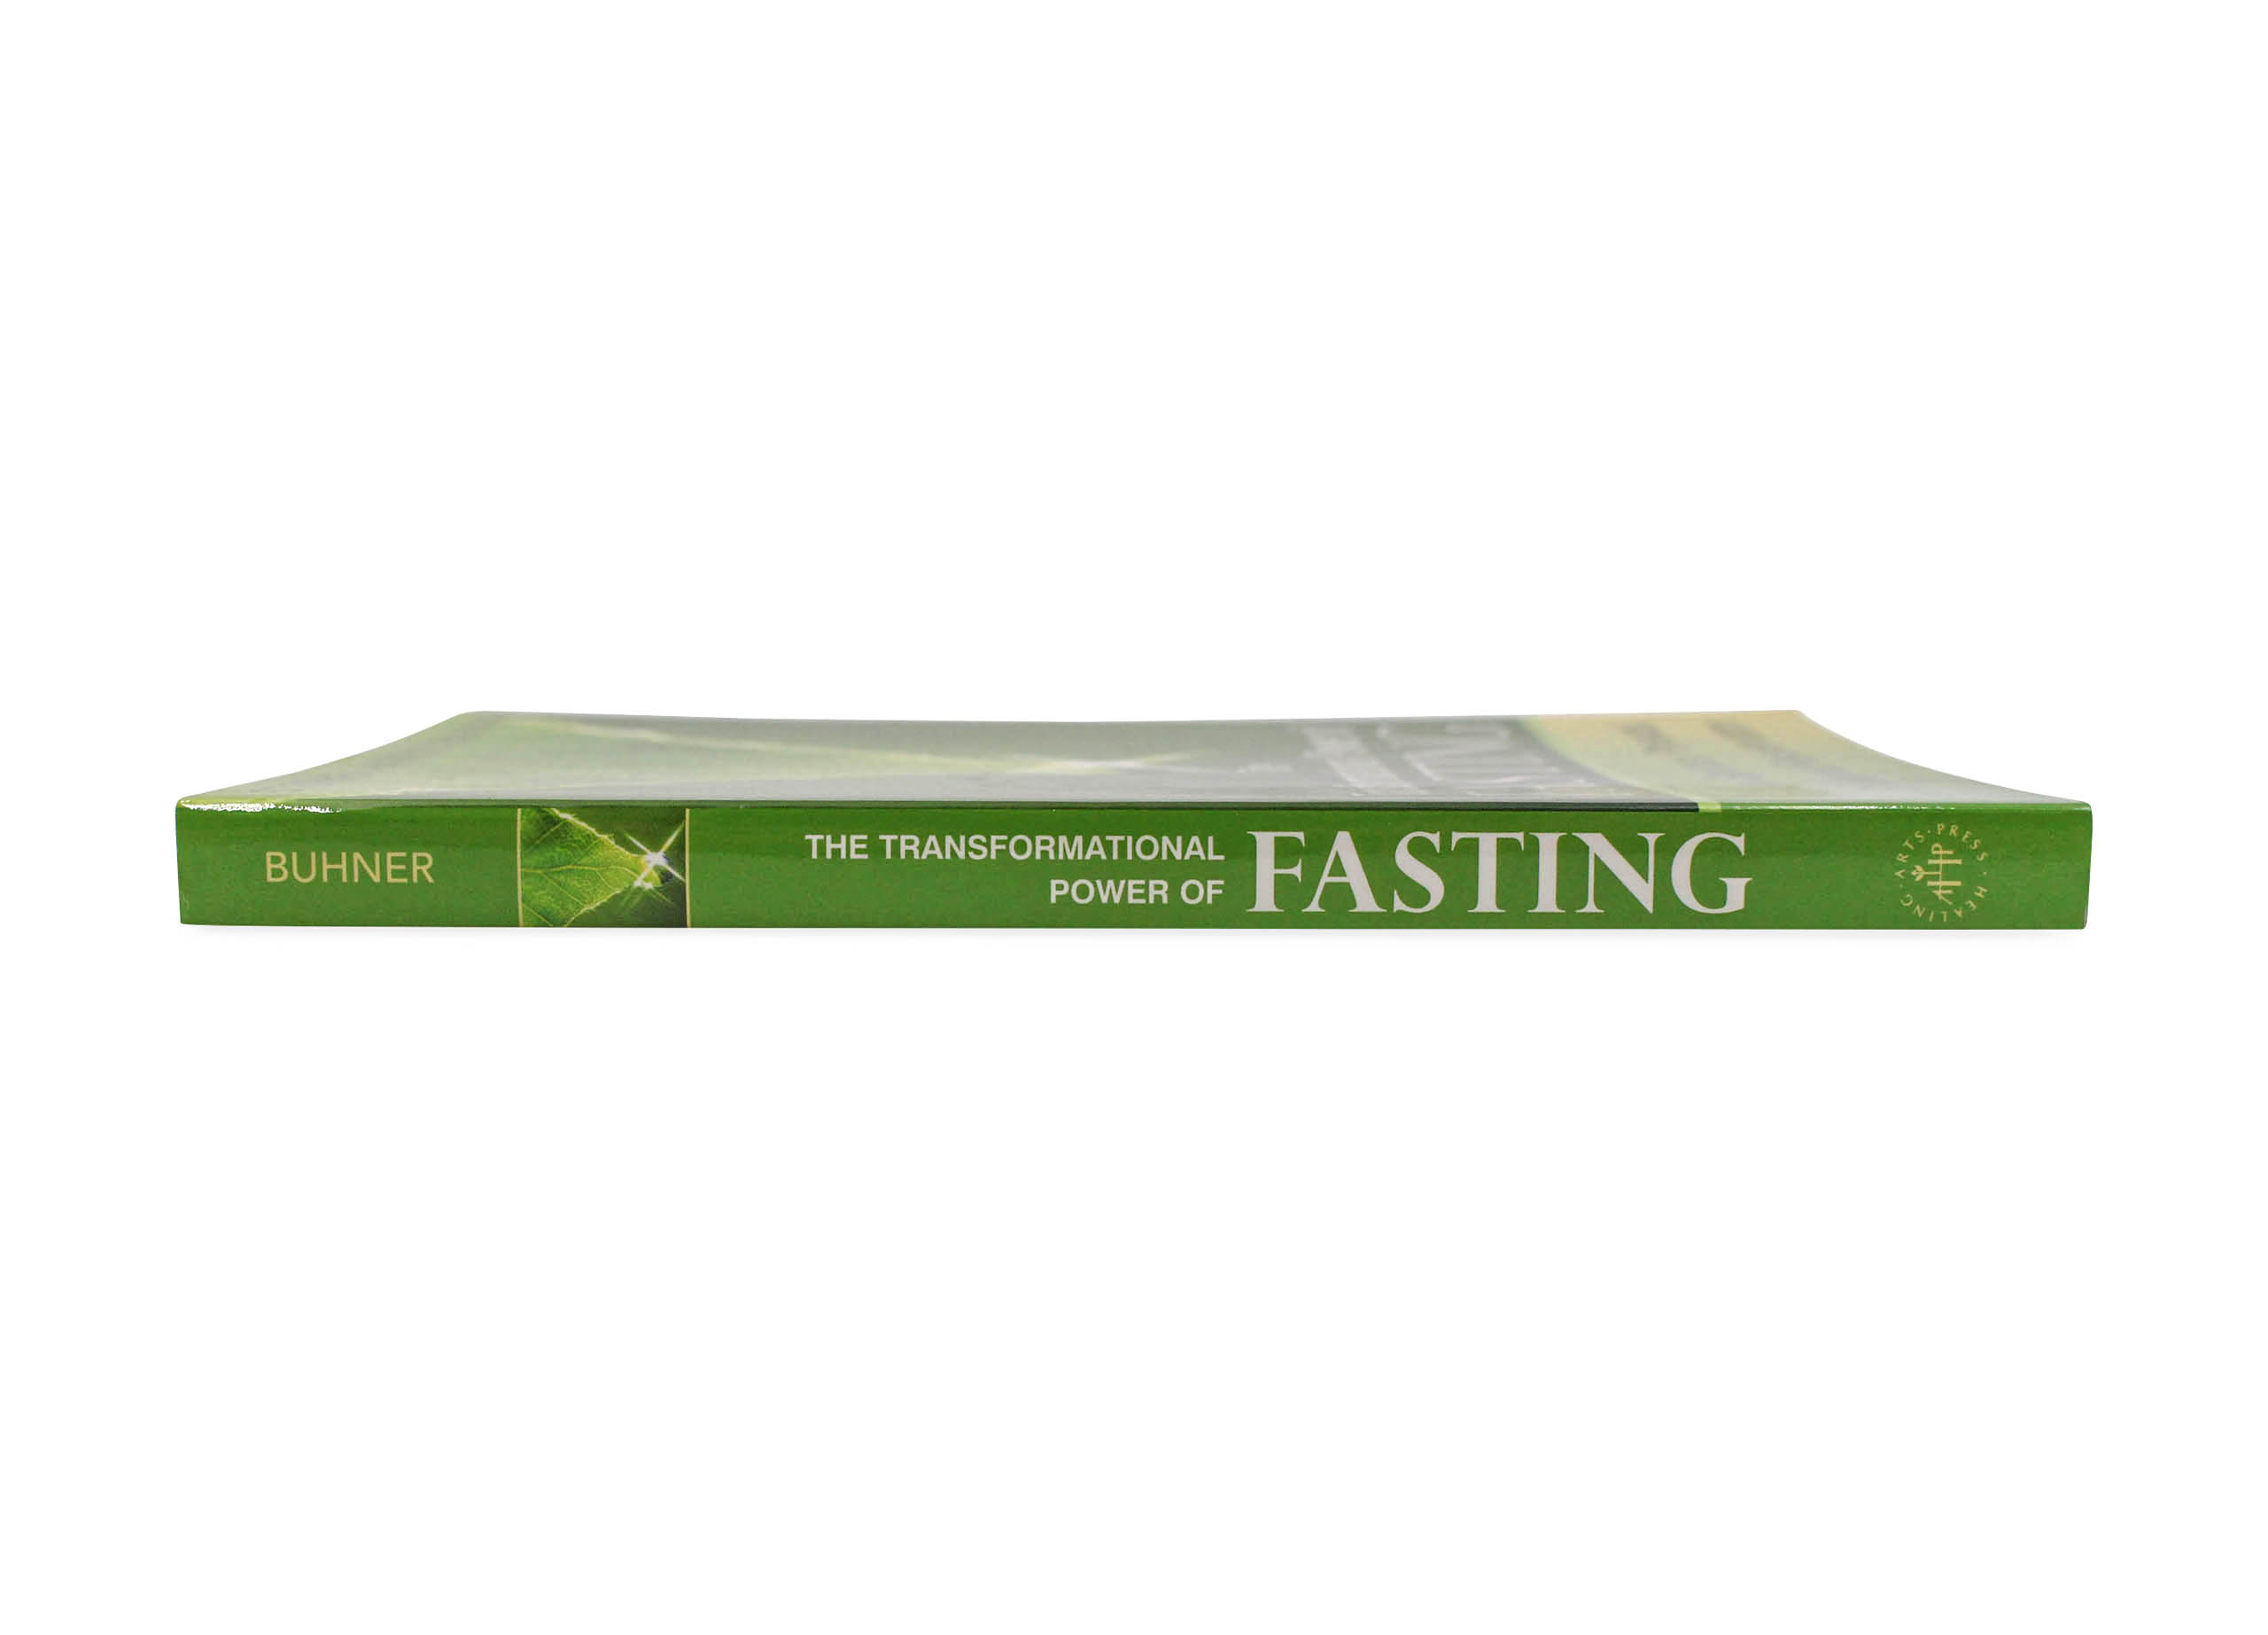 The Transformational Power of Fasting: The Way to Spiritual, Physical, and Emotional Rejuvenation -Crystal Dreams